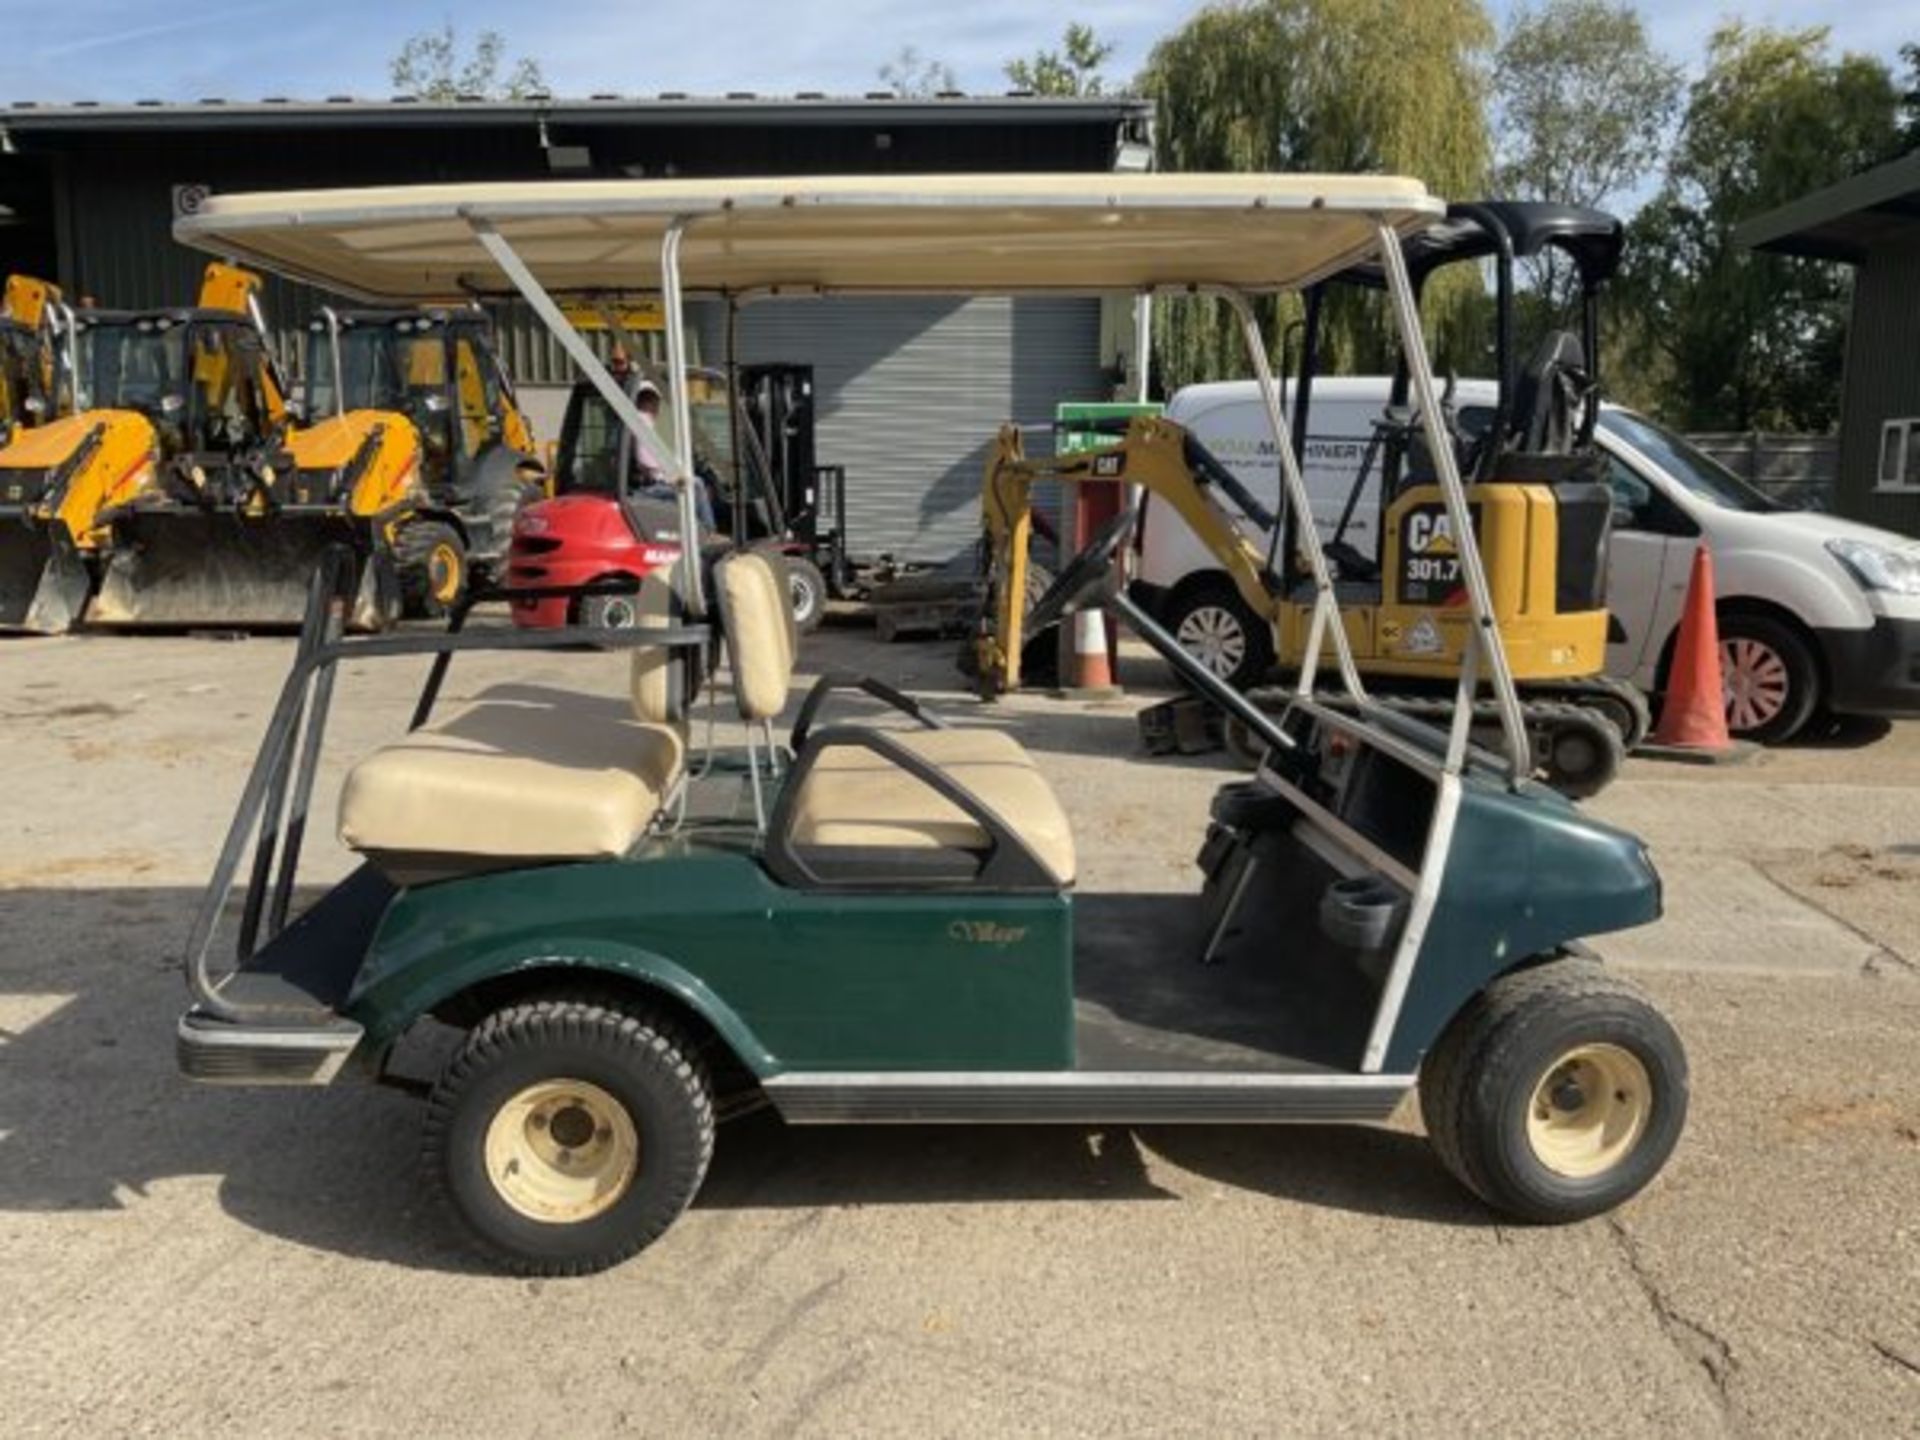 CLUB CAR VILLAGER GOLF BUGGY. PETROL. WINDSHIELD. 4 PASSENGERS. - Image 6 of 9